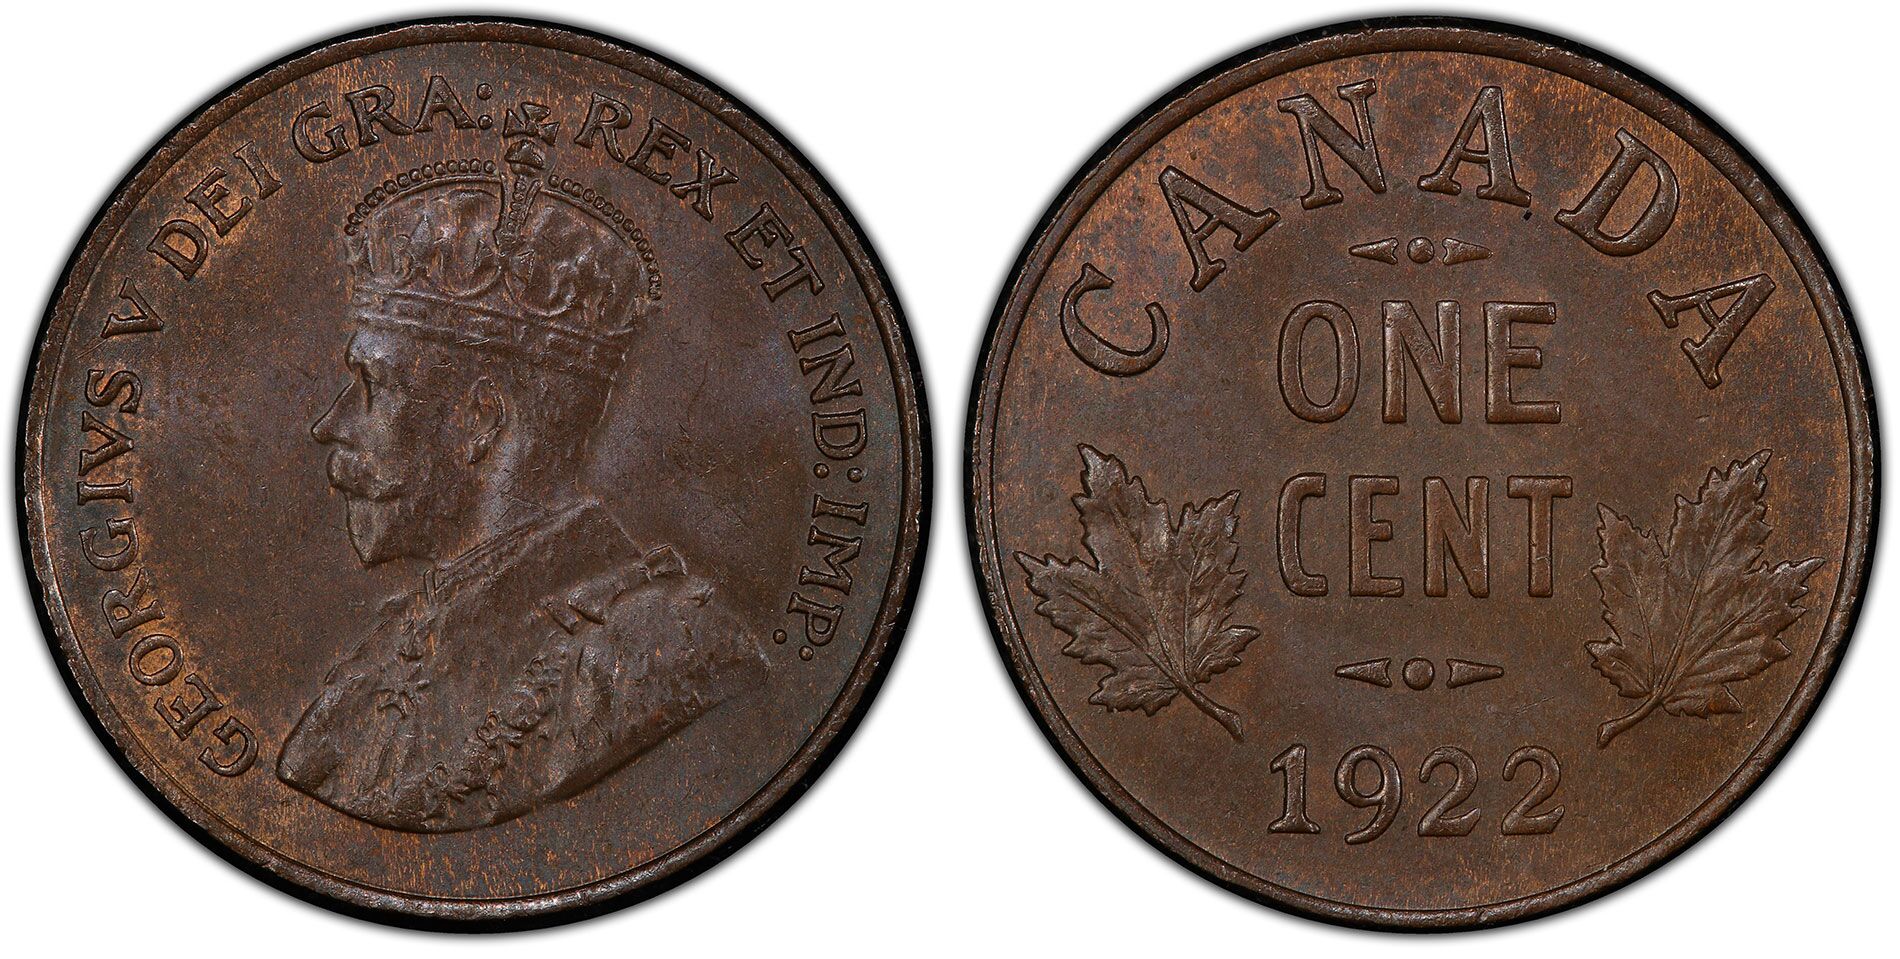 1922 Canada Cents - PCGS